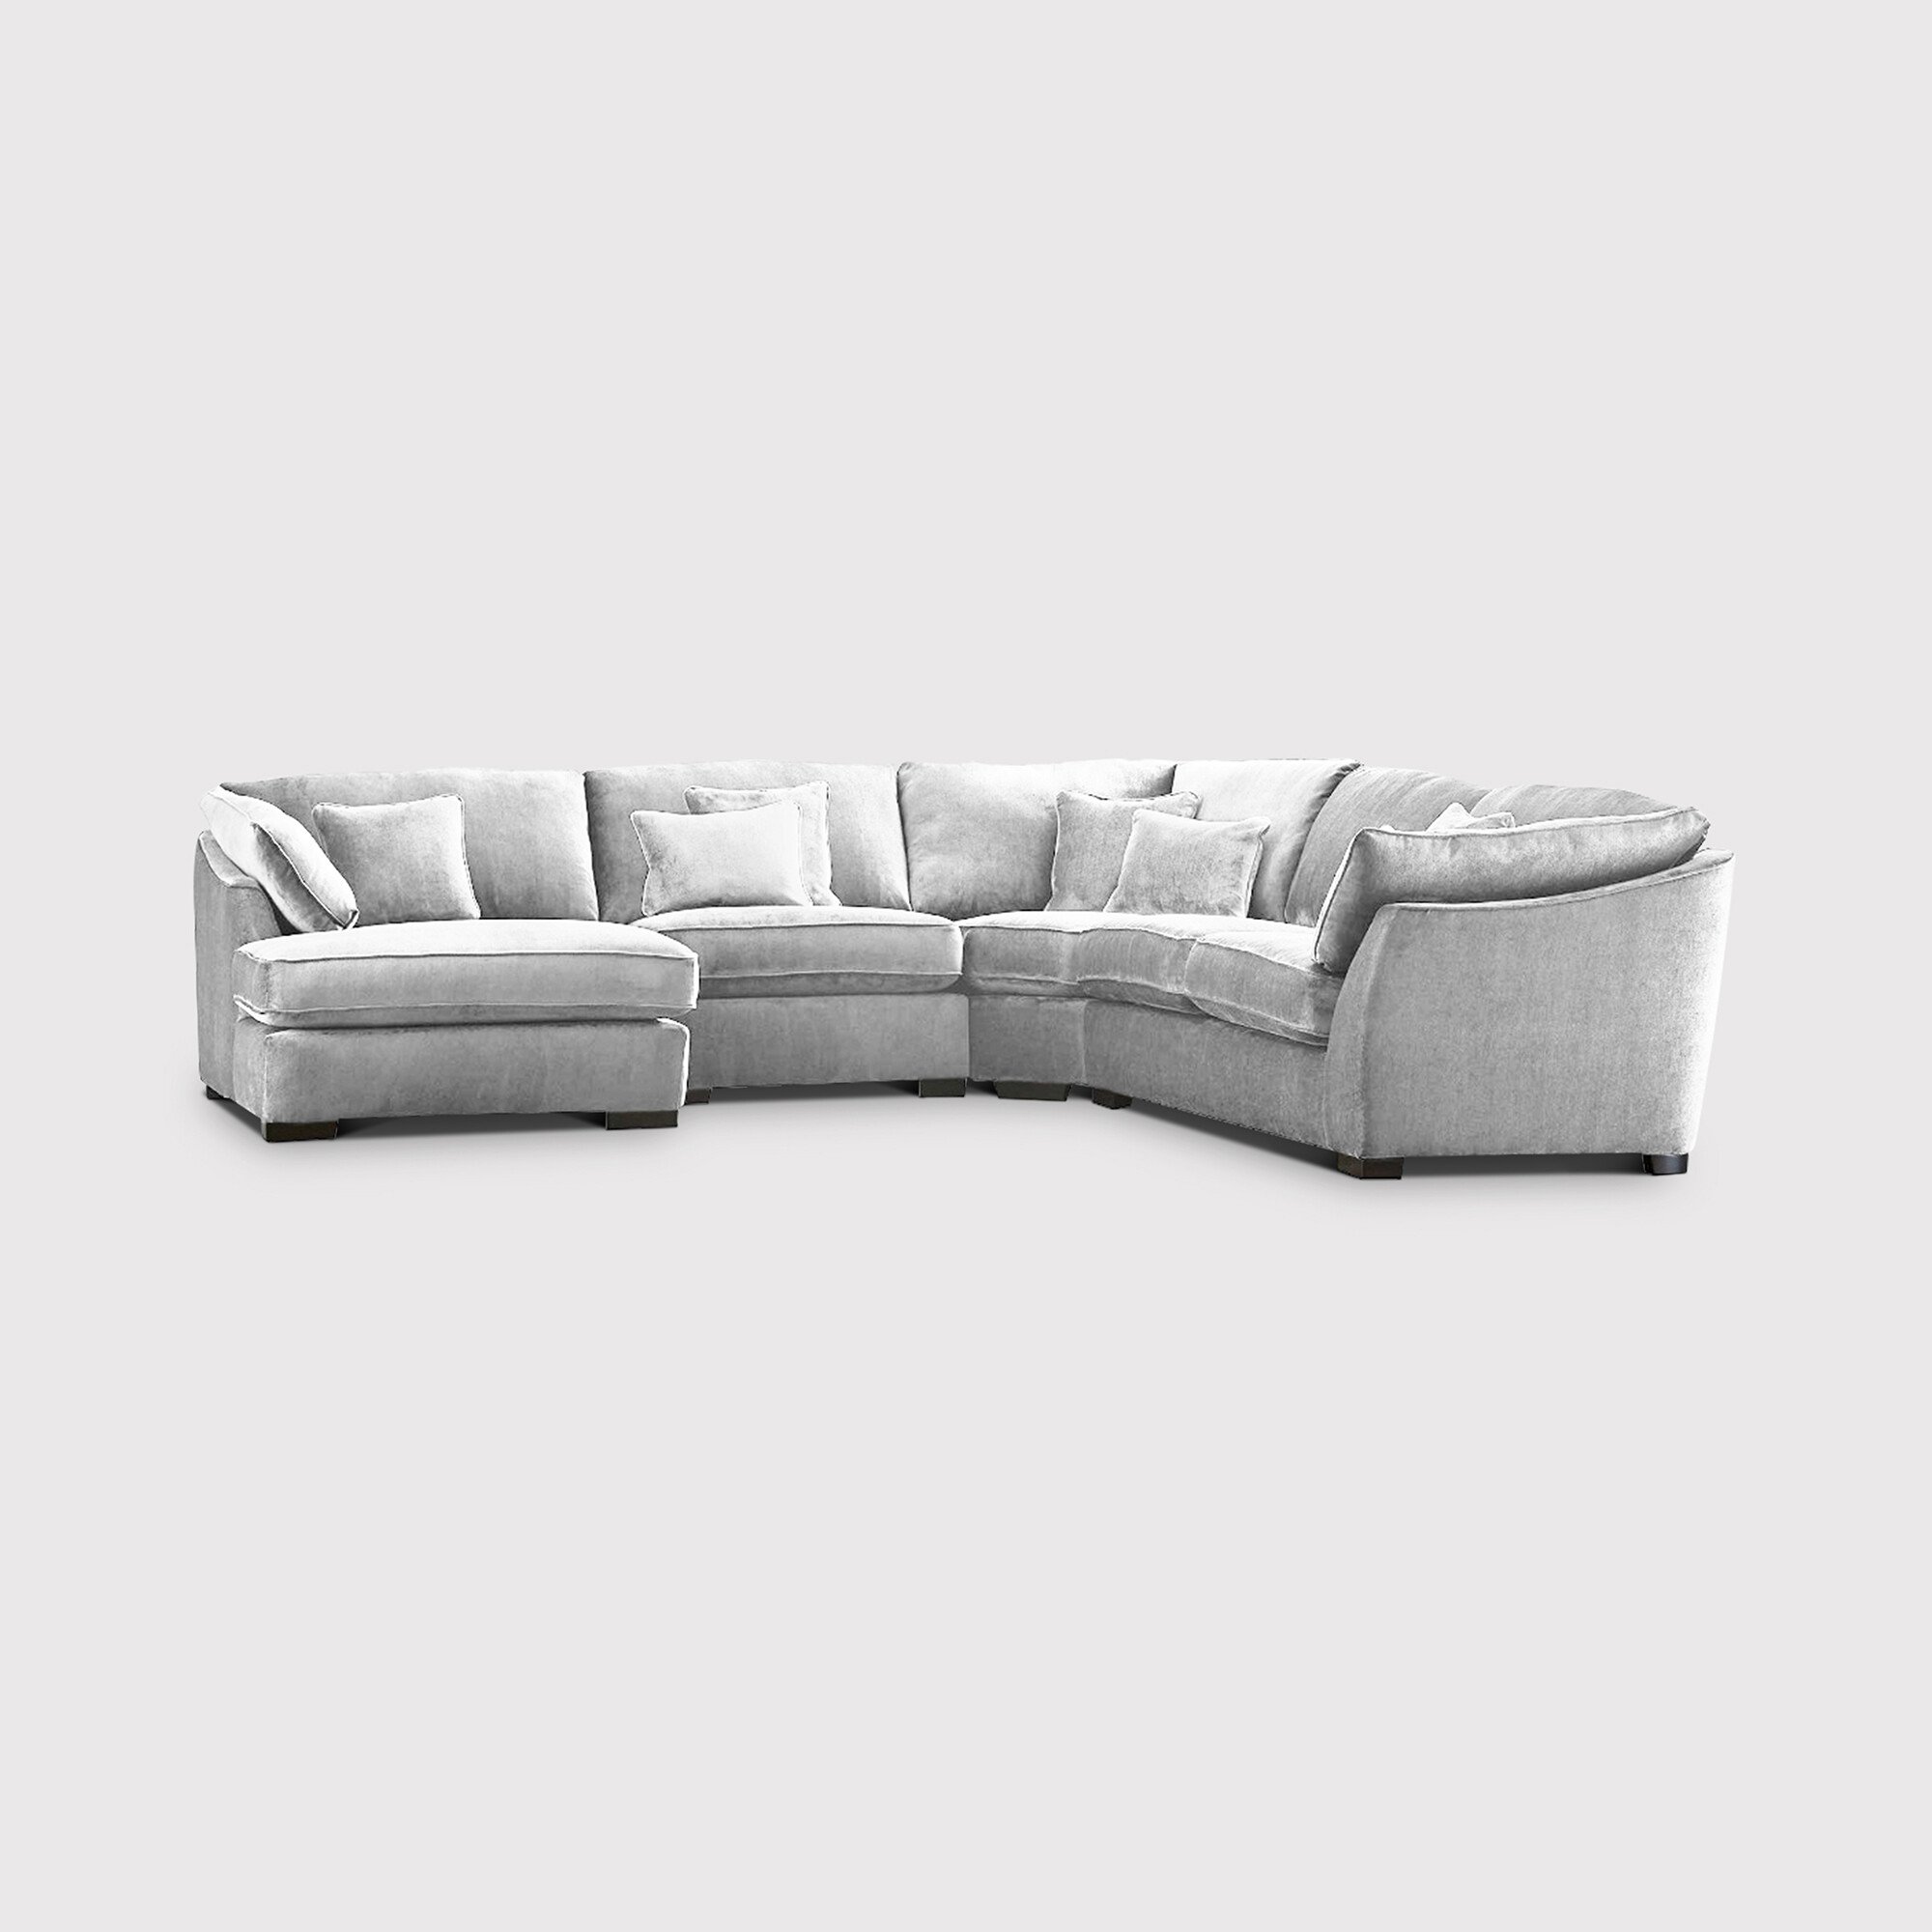 Borelly Corner Group Right With Chaise, Neutral Fabric | Barker & Stonehouse